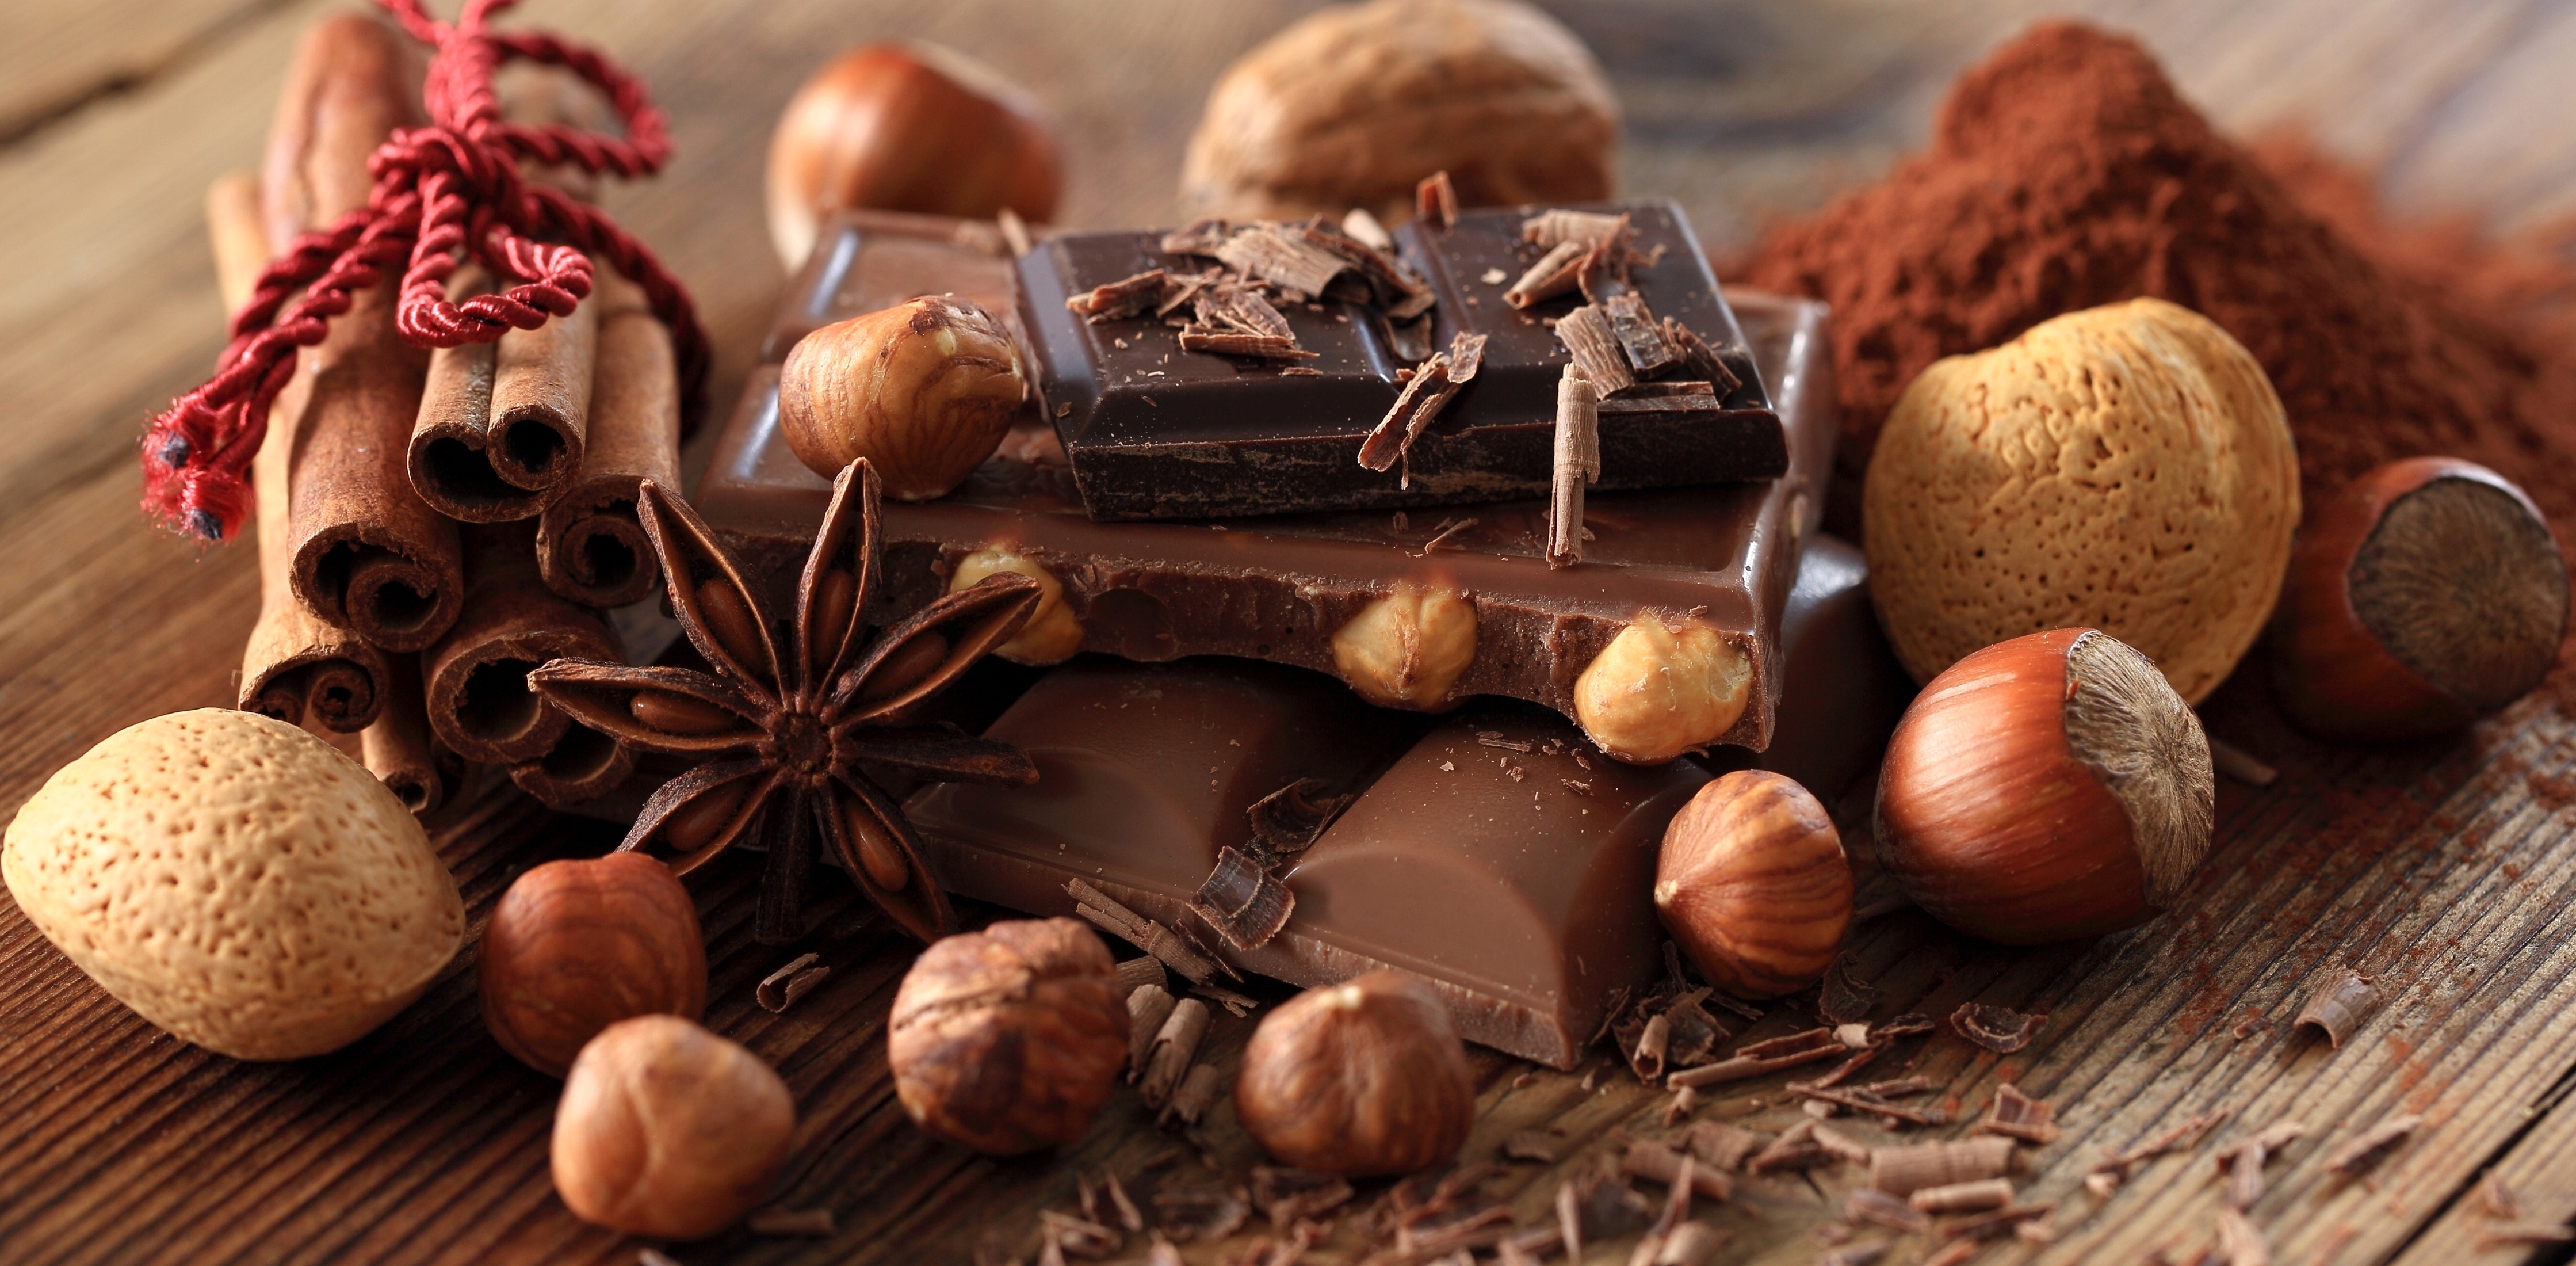 Chocolate 4k Ultra HD Wallpaper And Background Image 4478x2200